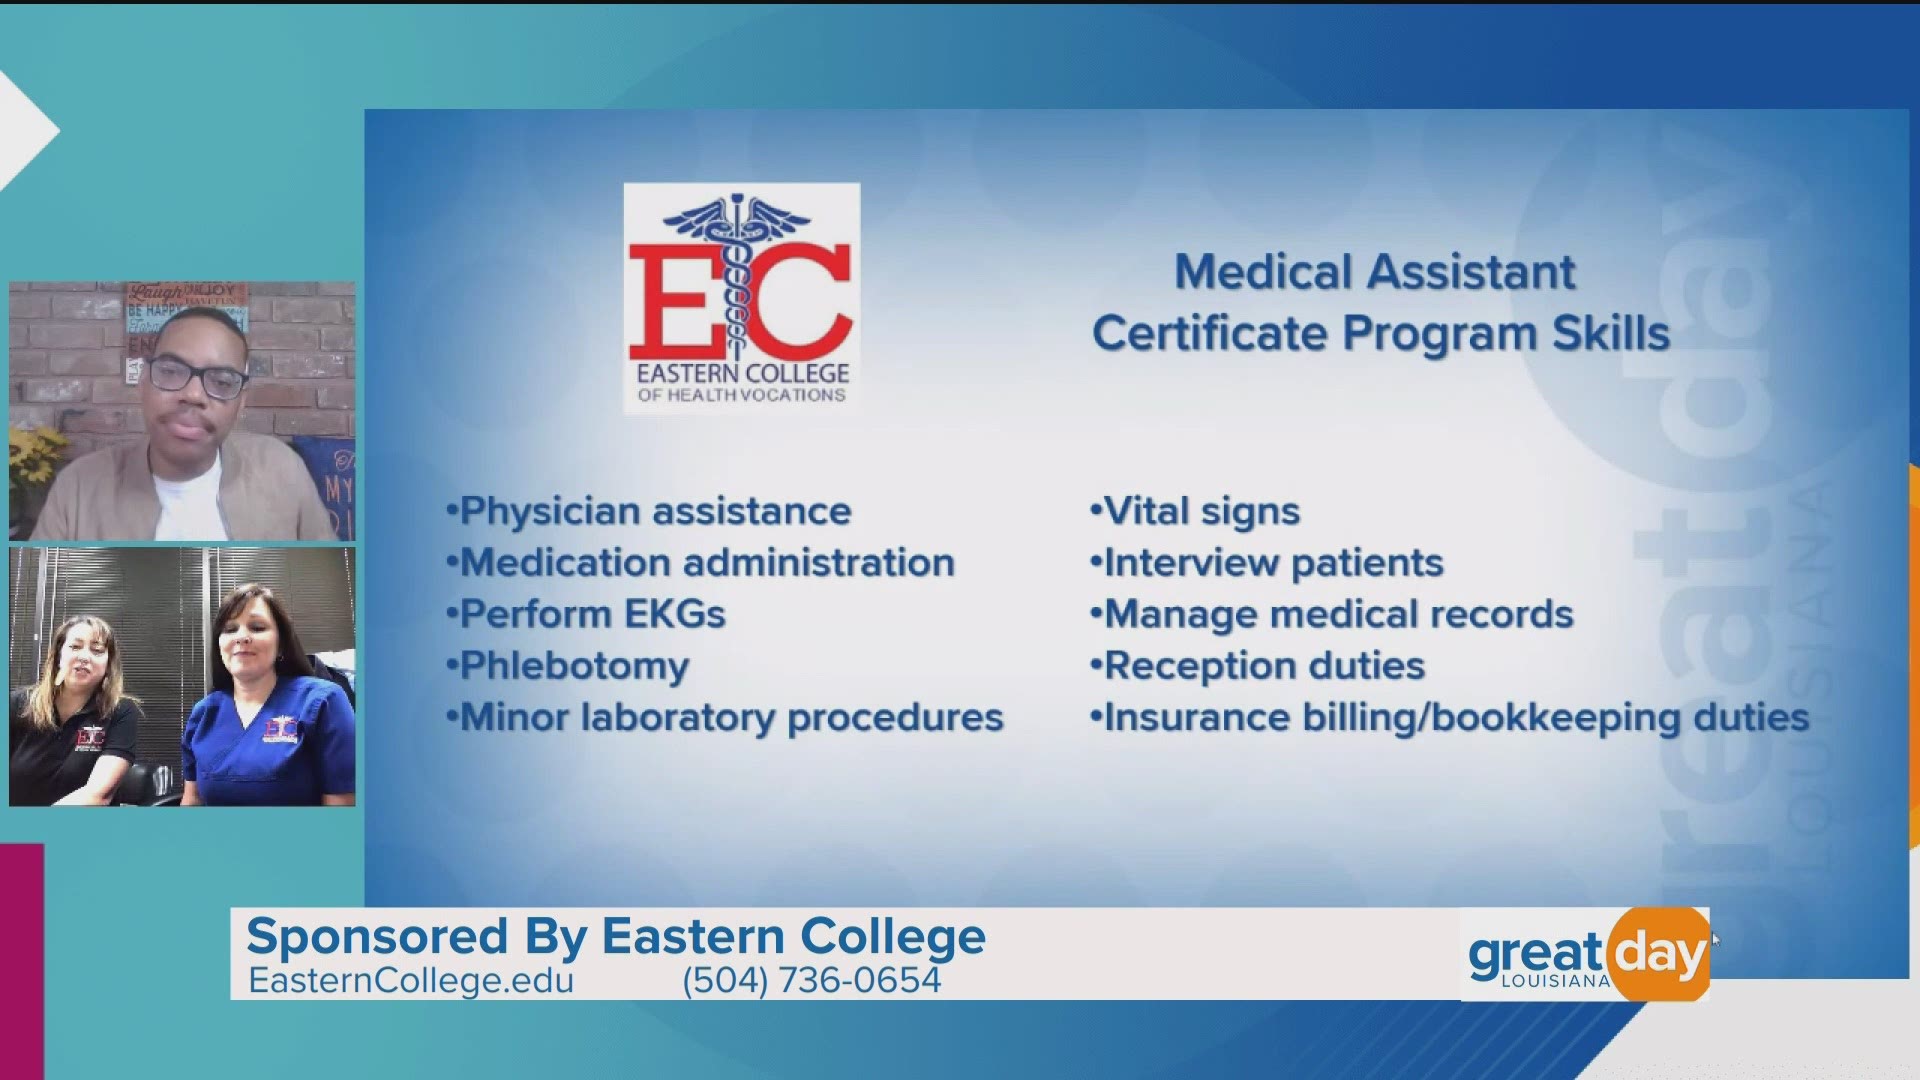 Eastern College provides training to get rewarding careers in the medical field. To learn more, visit easterncollege.edu